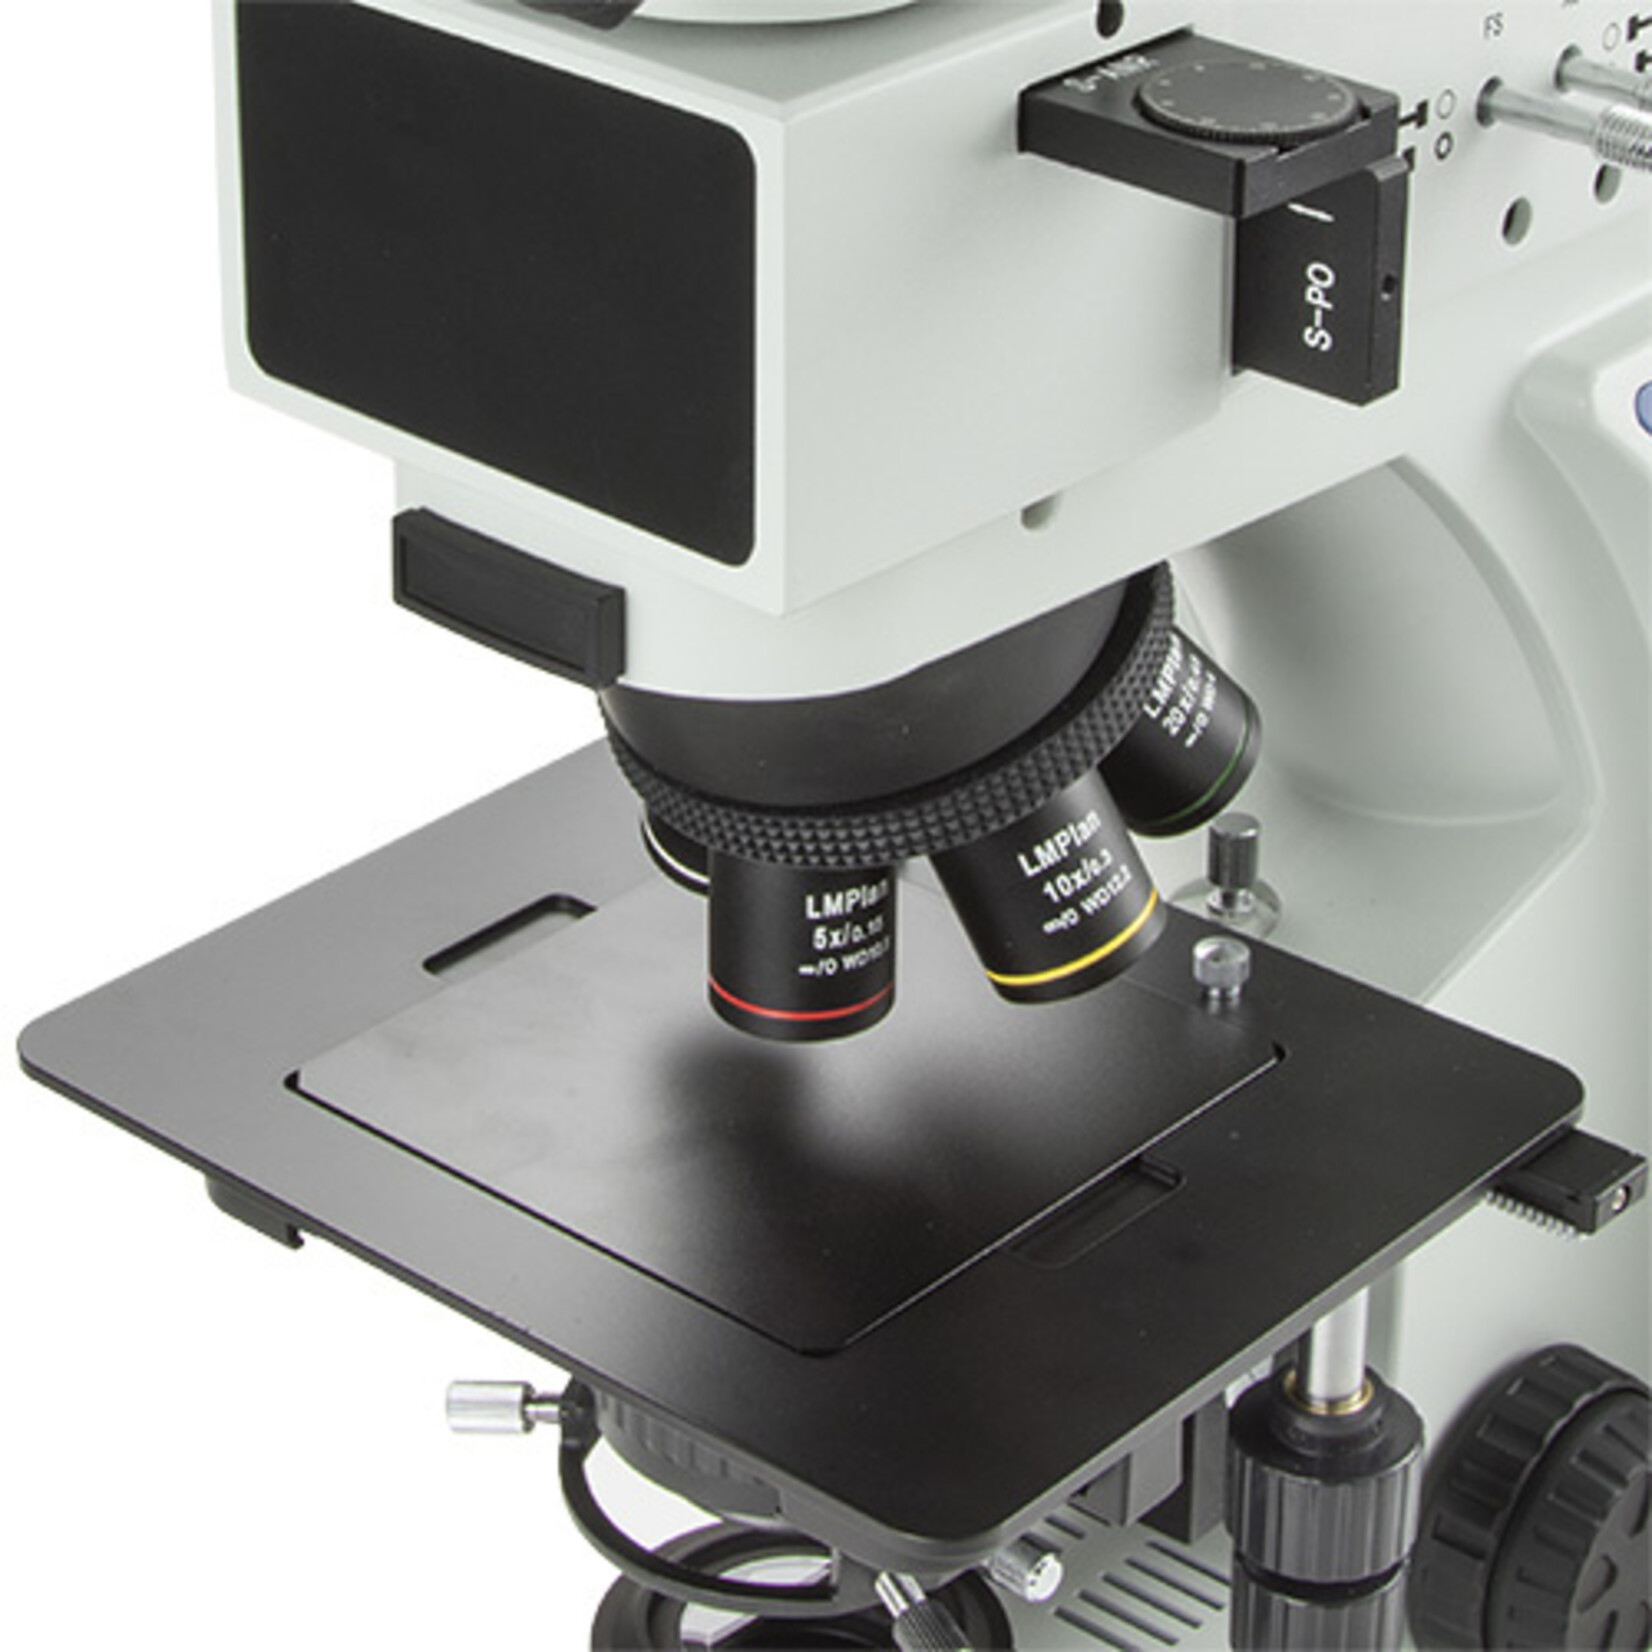 Oxion industrial microscope for cross sections